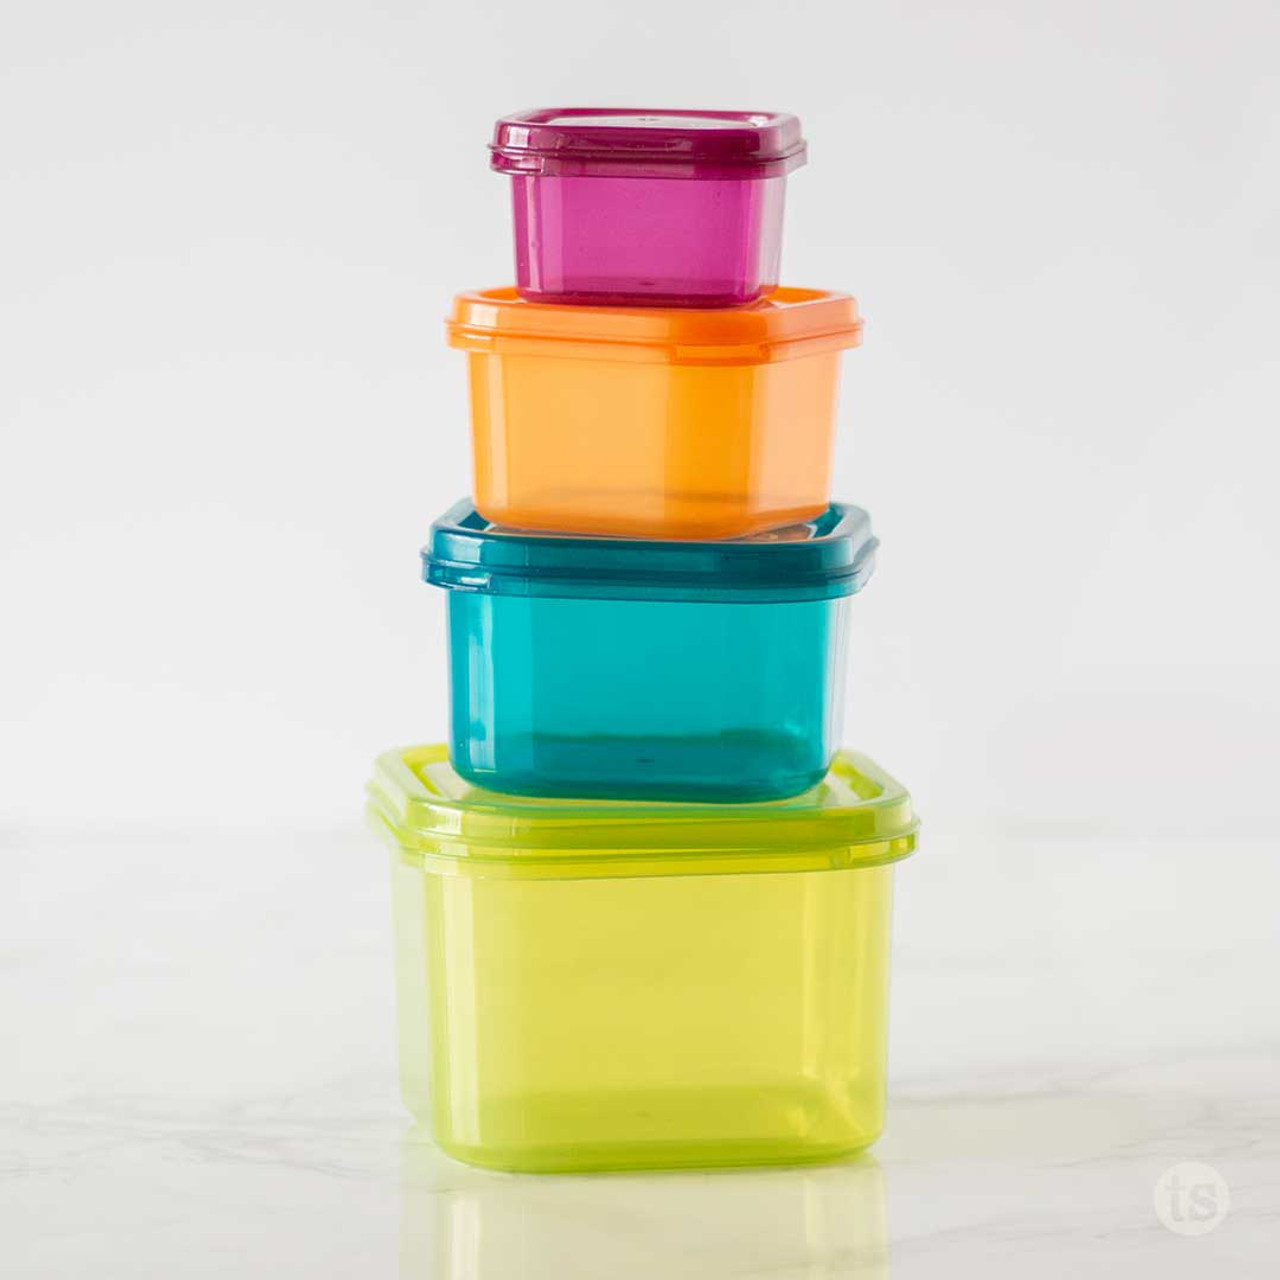 Speed tip: Pre-fill sauce containers